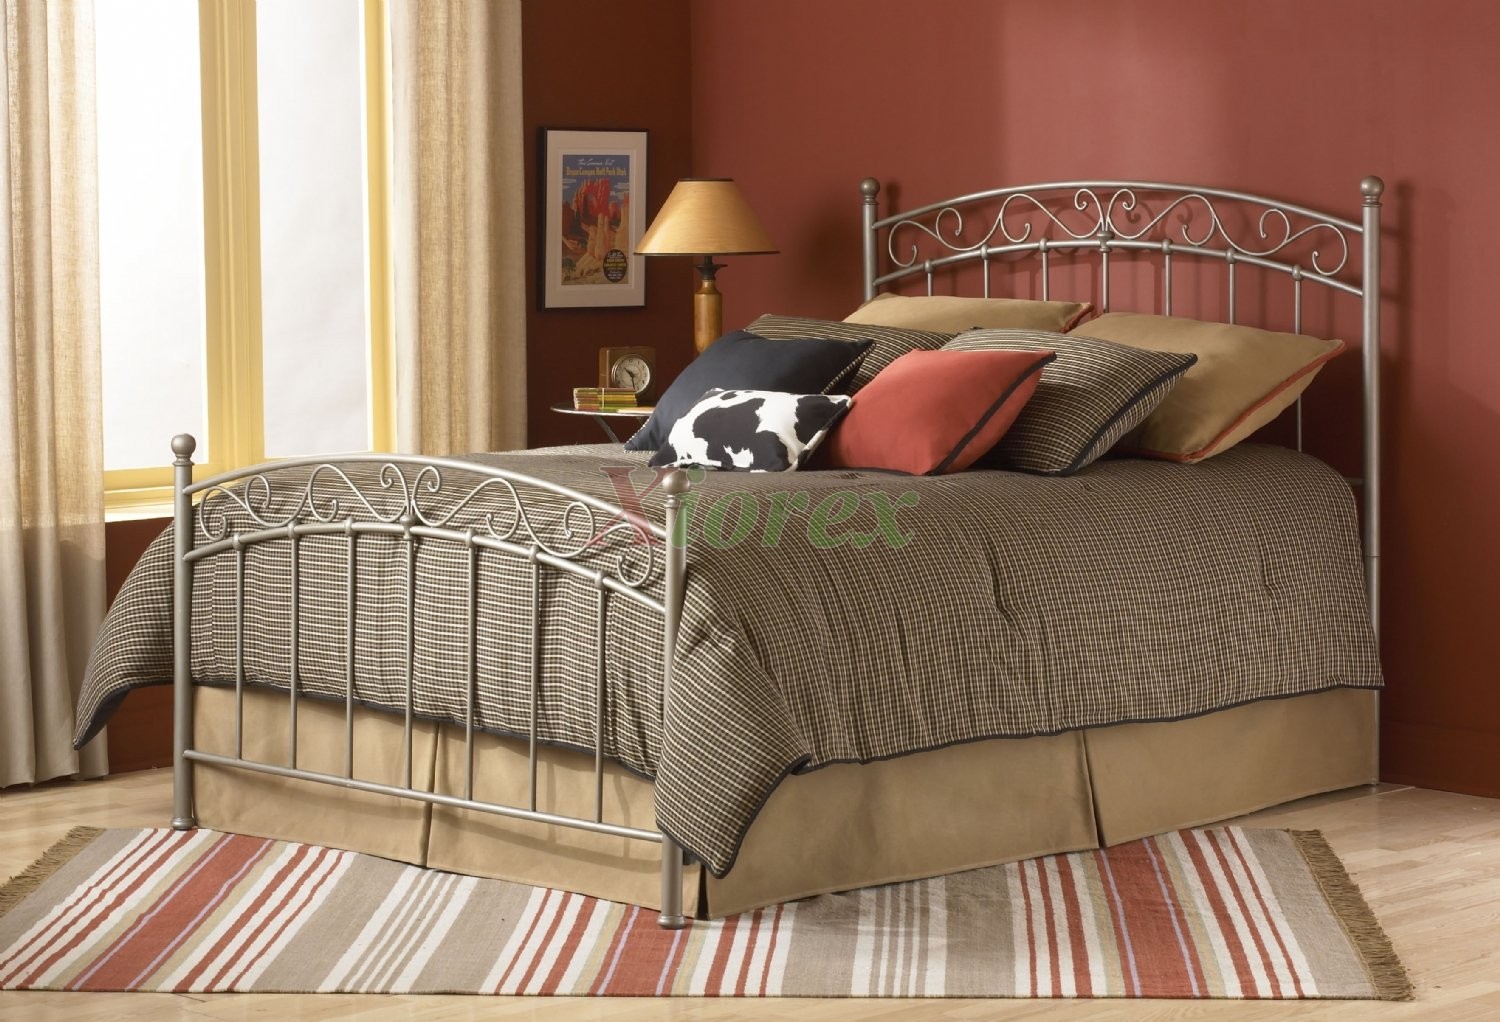 Metal Bed By Fashion Group Xiorex, Dunhill King Size Bed And Frame